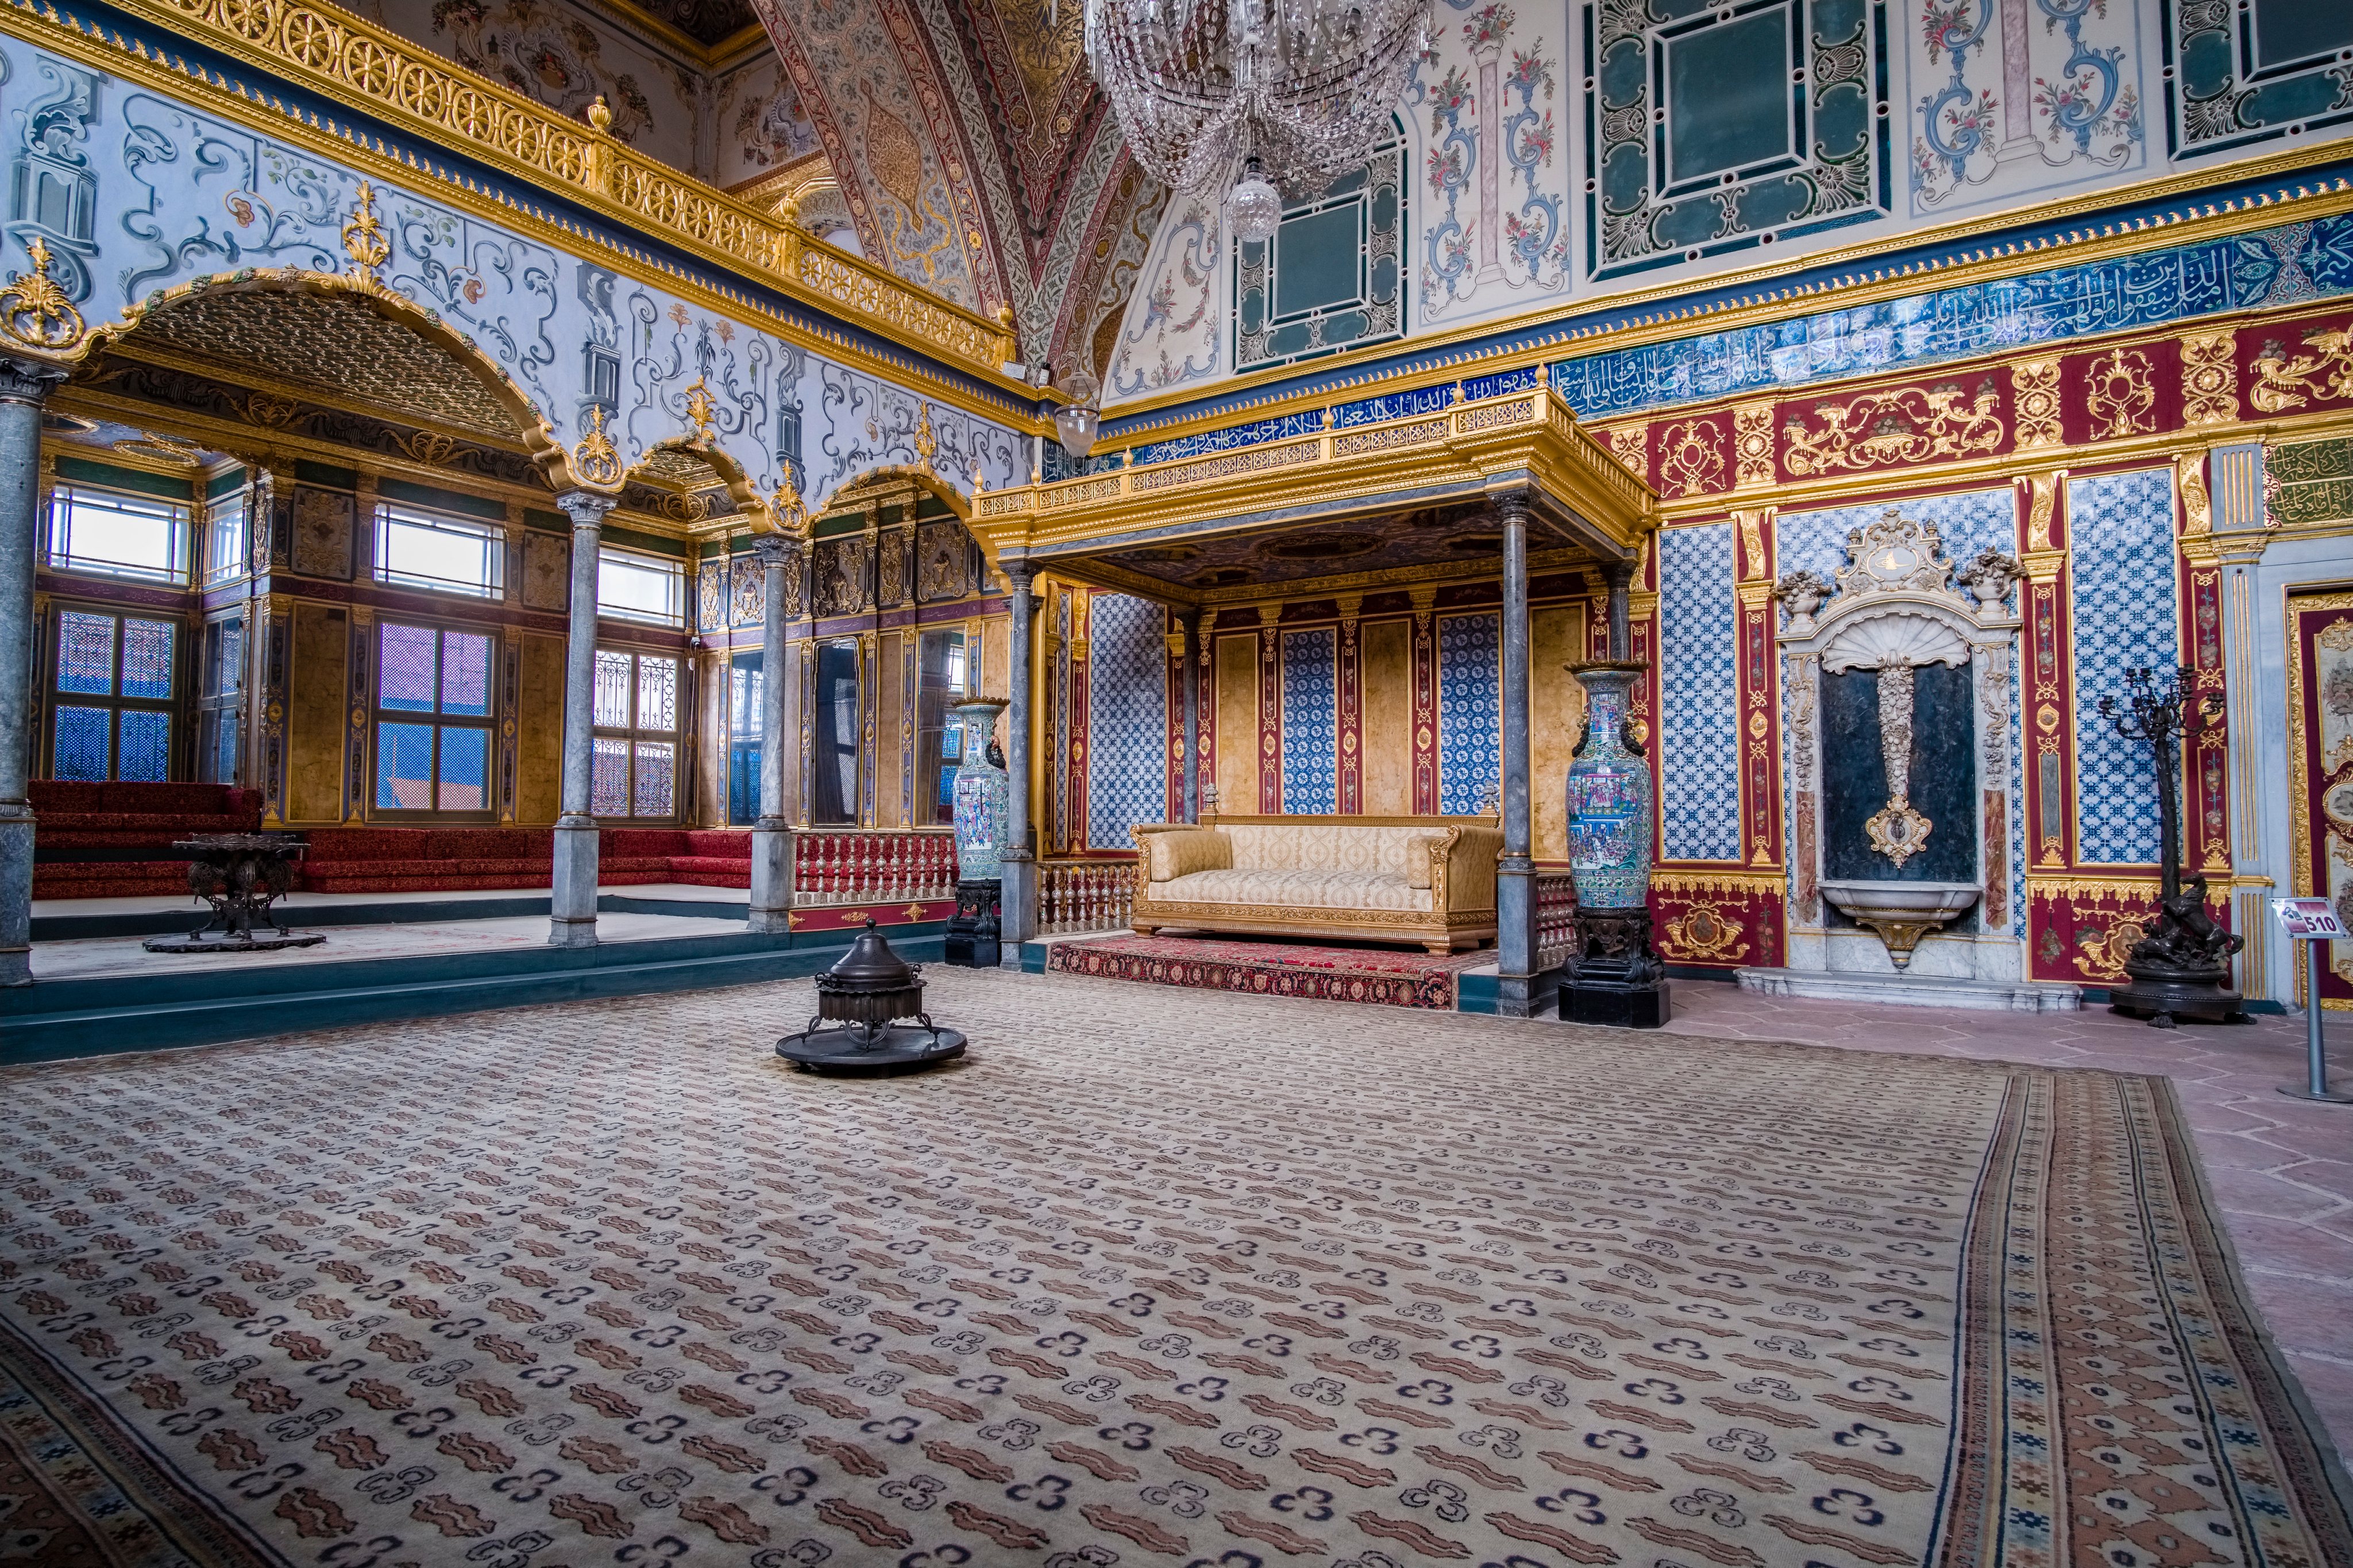 Interior design of the Imperial Hall, Hünkâr Sofas, one